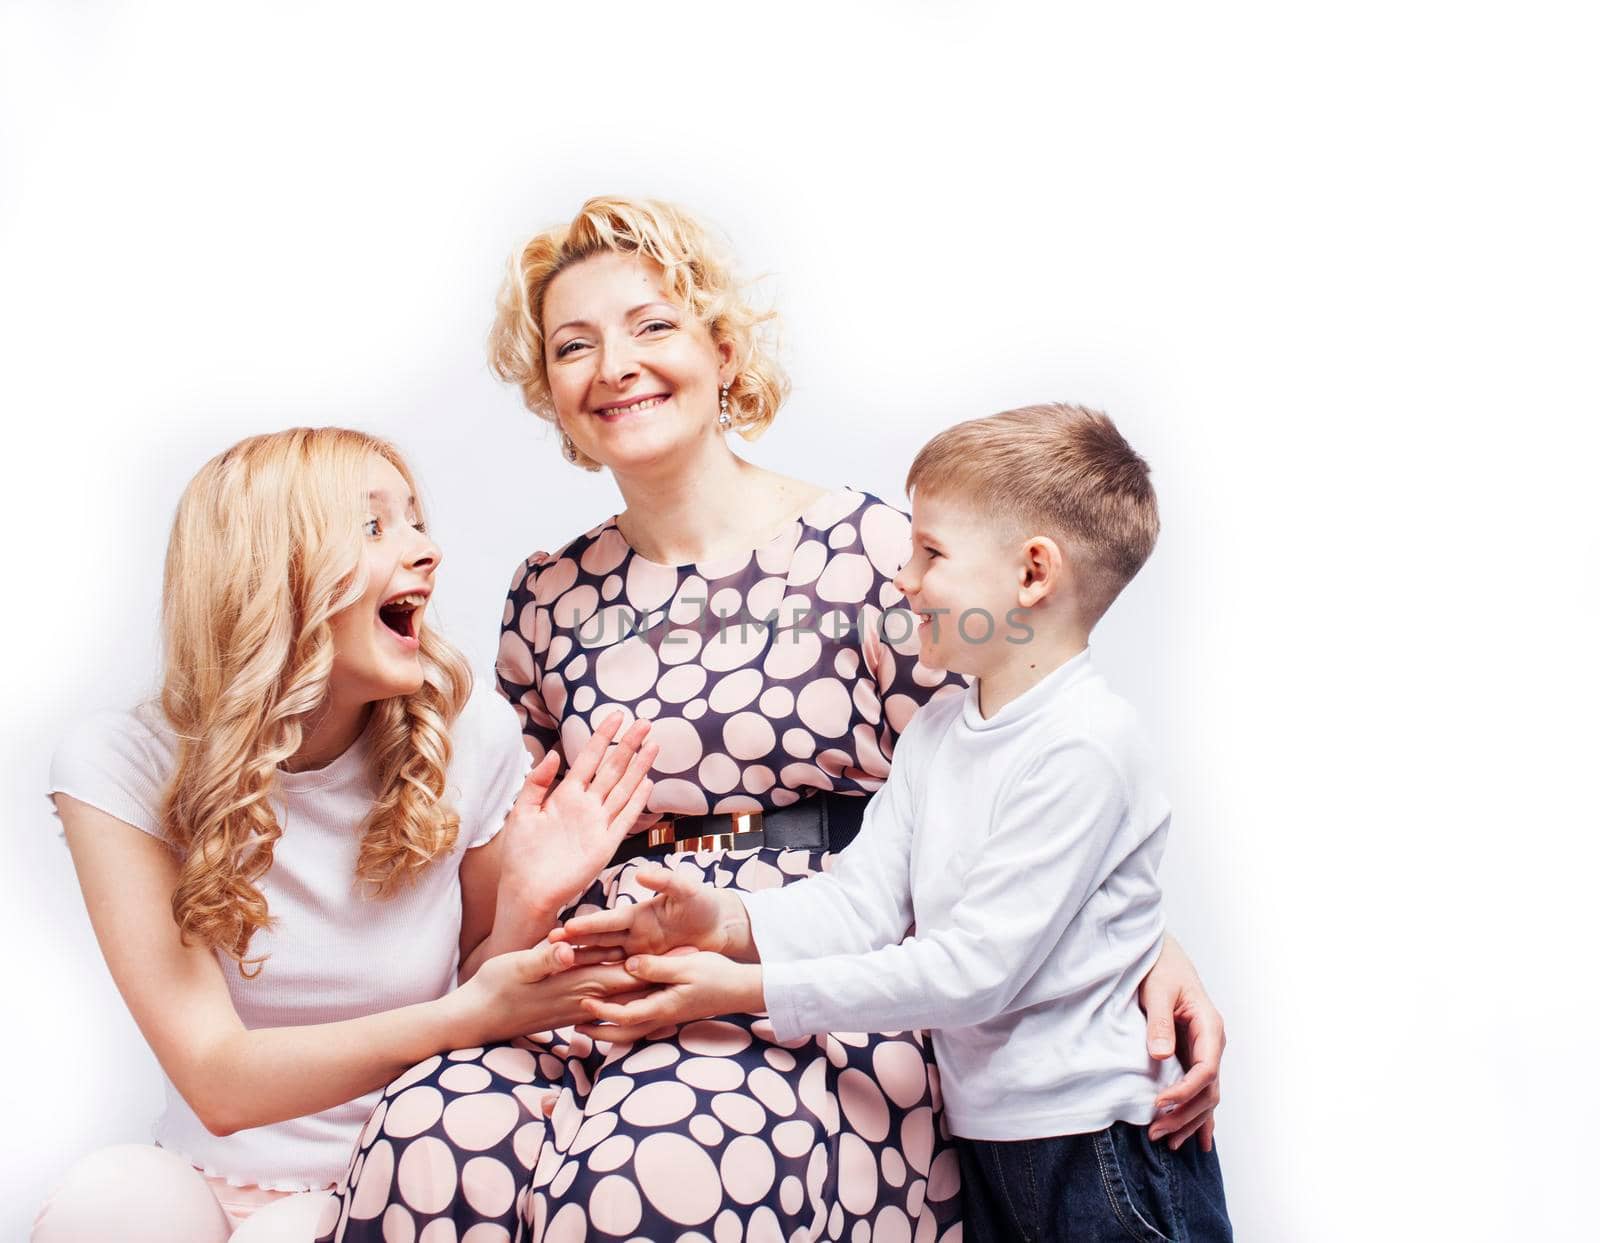 happy smiling blond family together posing cheerful on white background, generation concept. lifestyle people close up